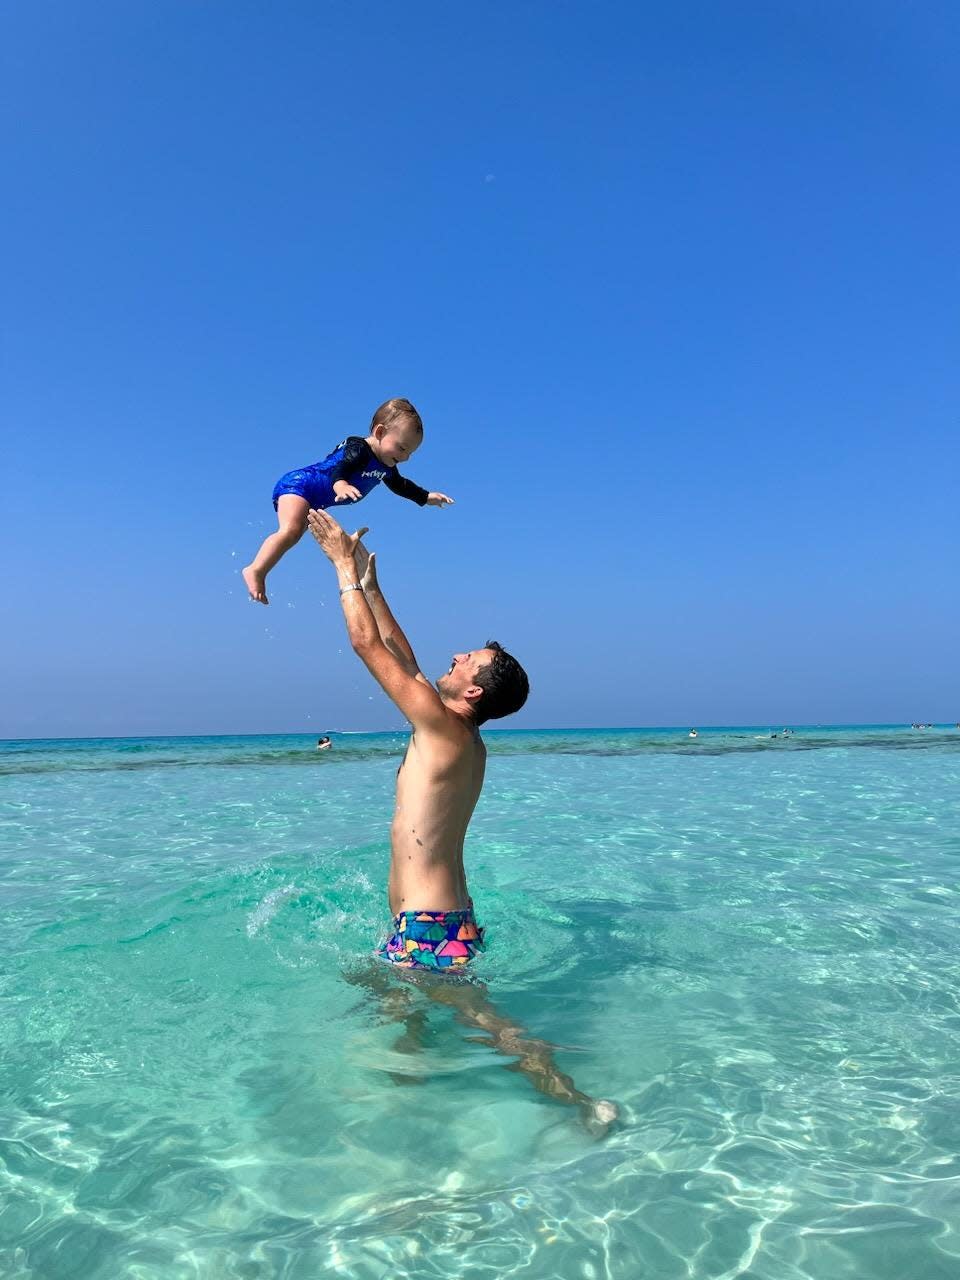 Sports editor Seth Stringer tosses his son, Wyatt, into the air on a recent visit to the beach.